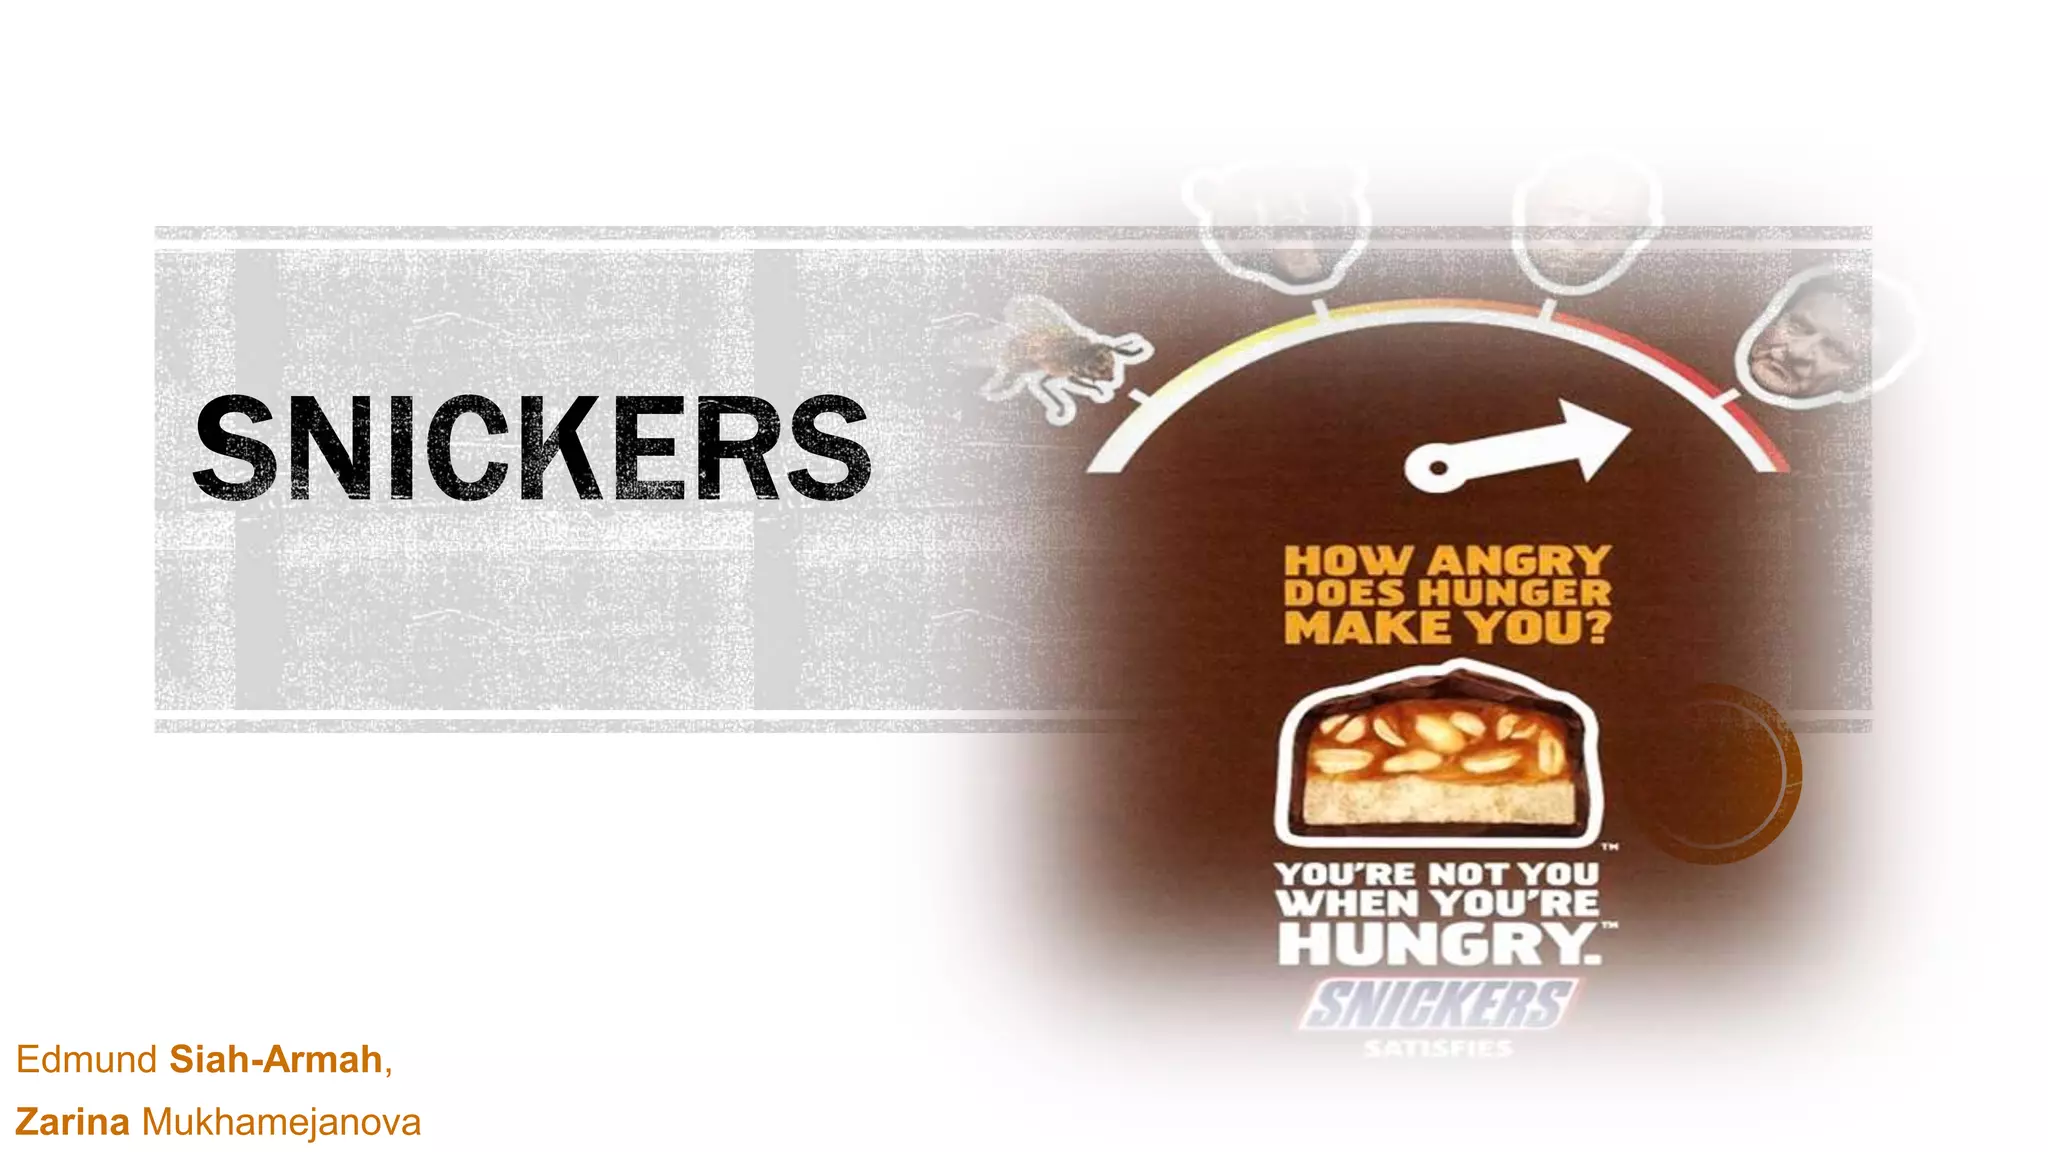 Snickers Ad Campaign “You’re Not You When You’re Hungry” | PPT